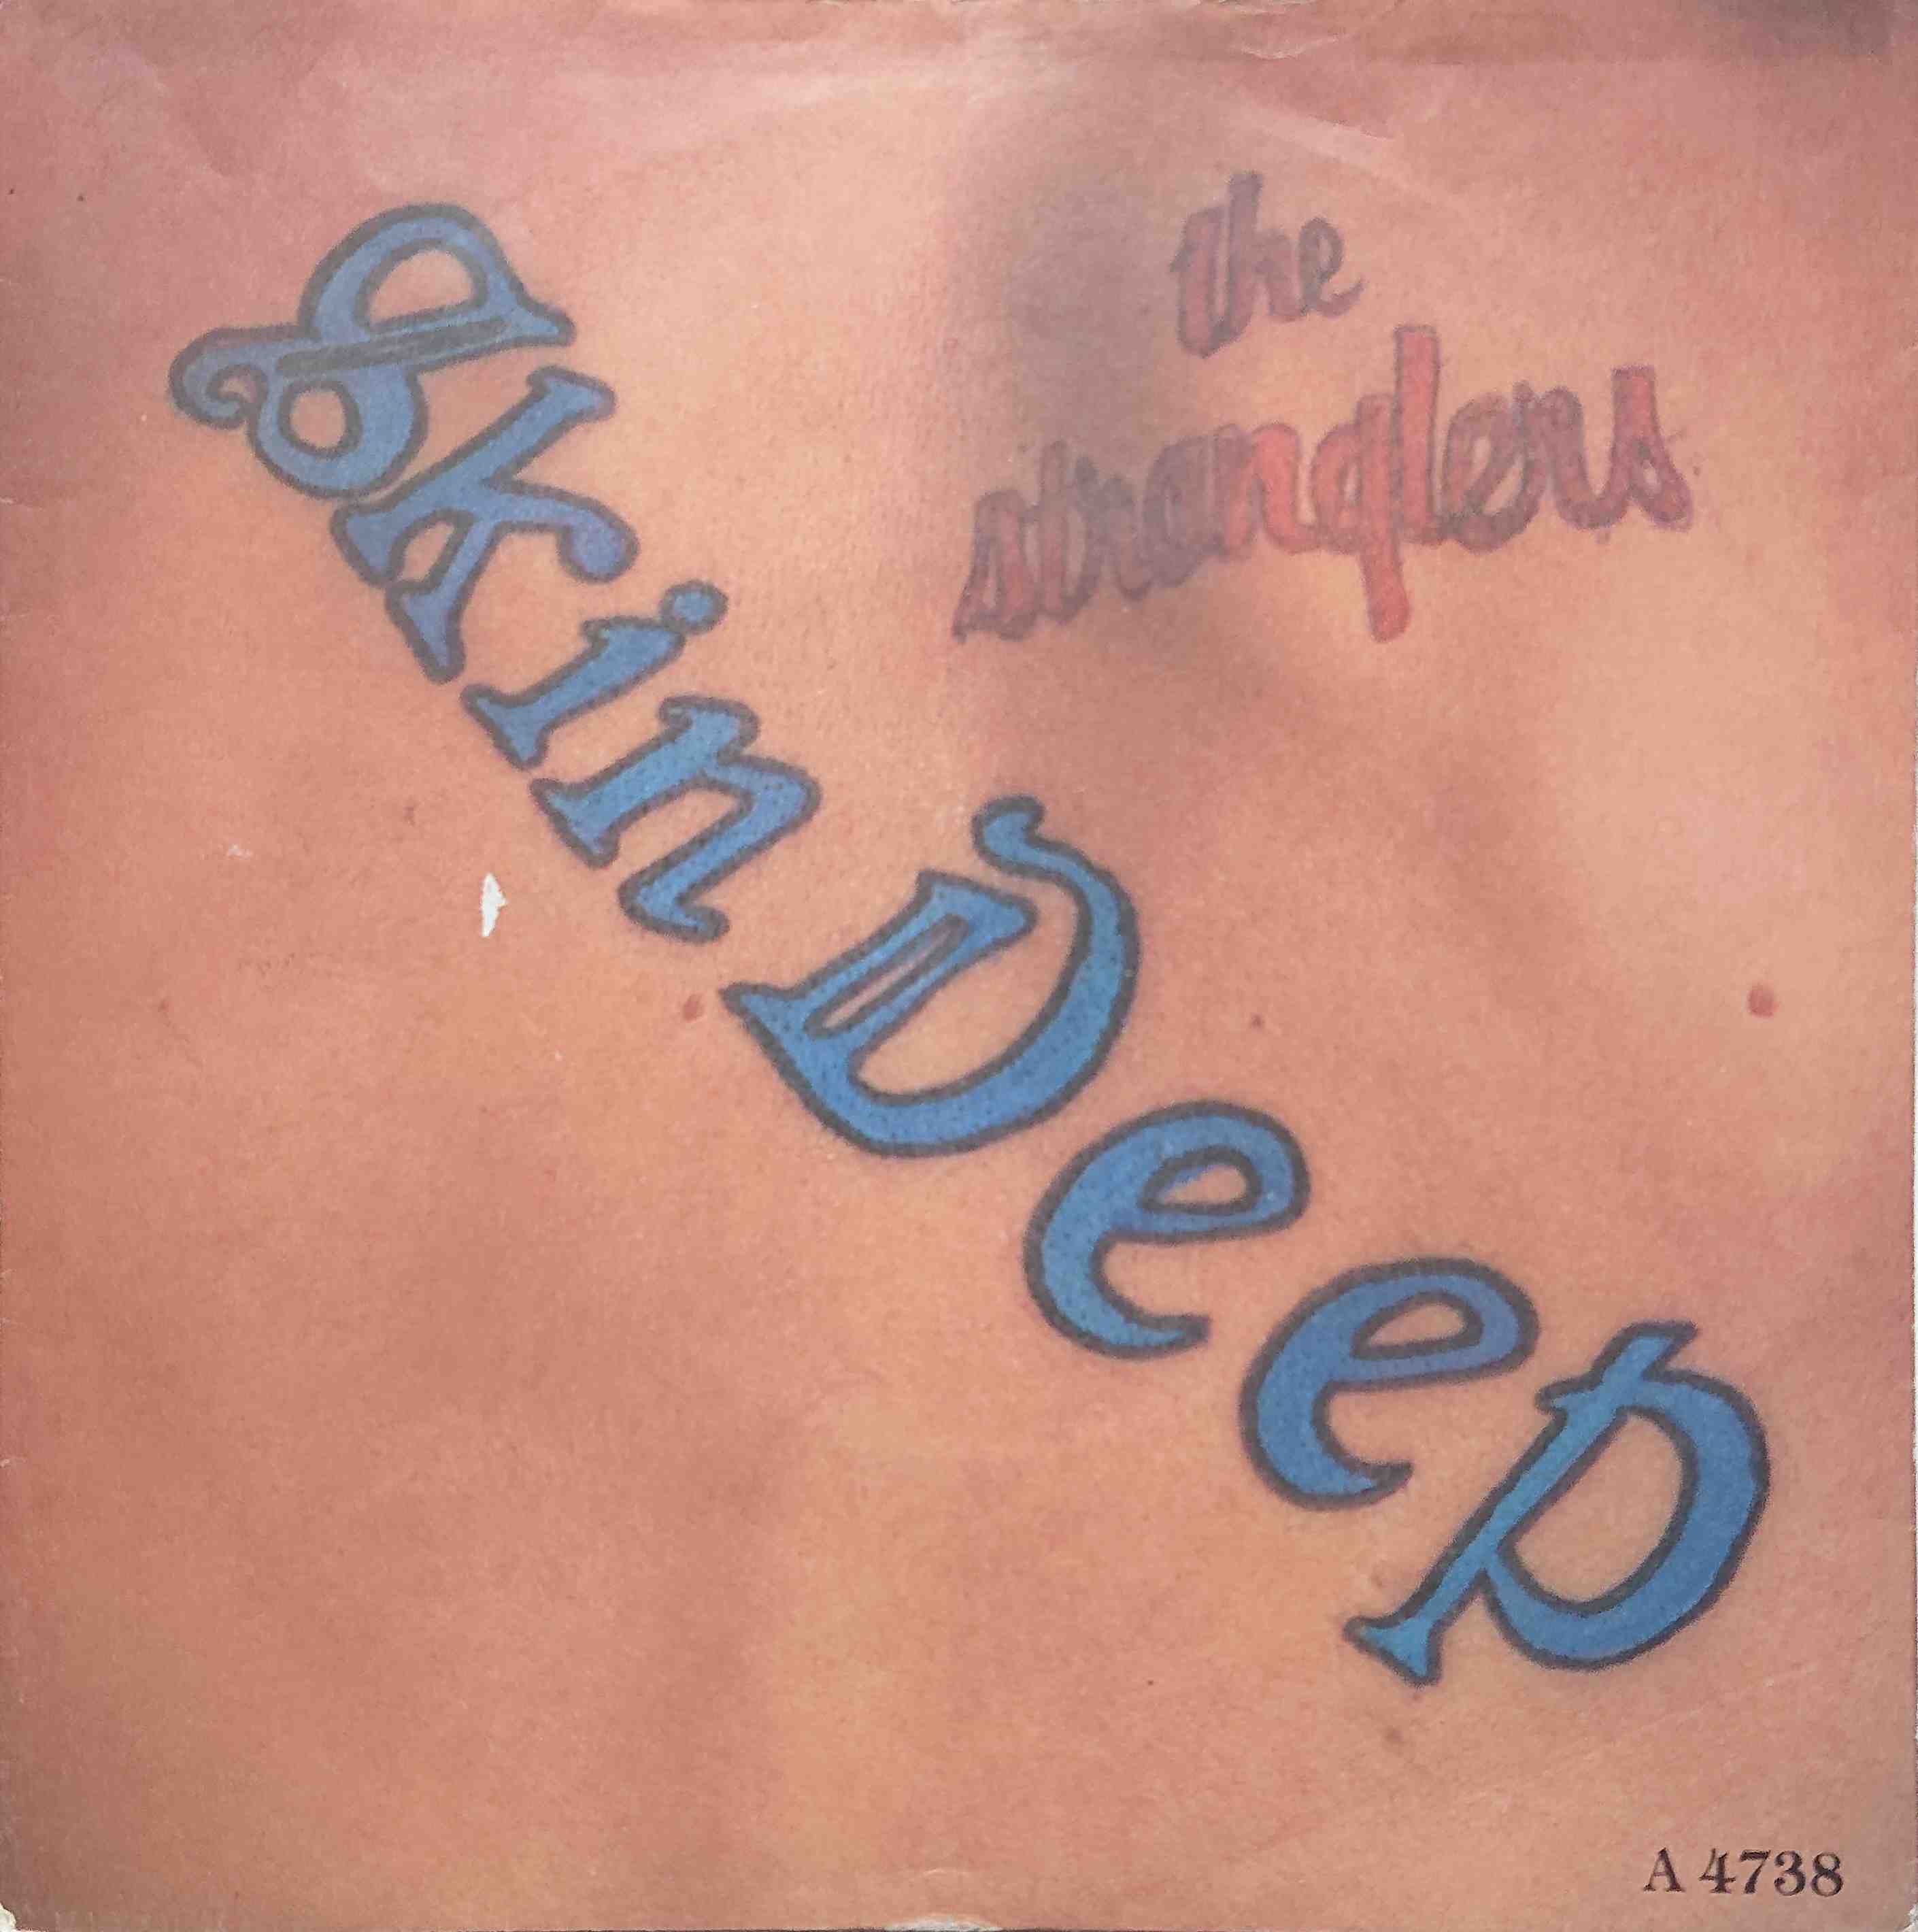 Picture of Skin deep by artist The Stranglers  from The Stranglers singles